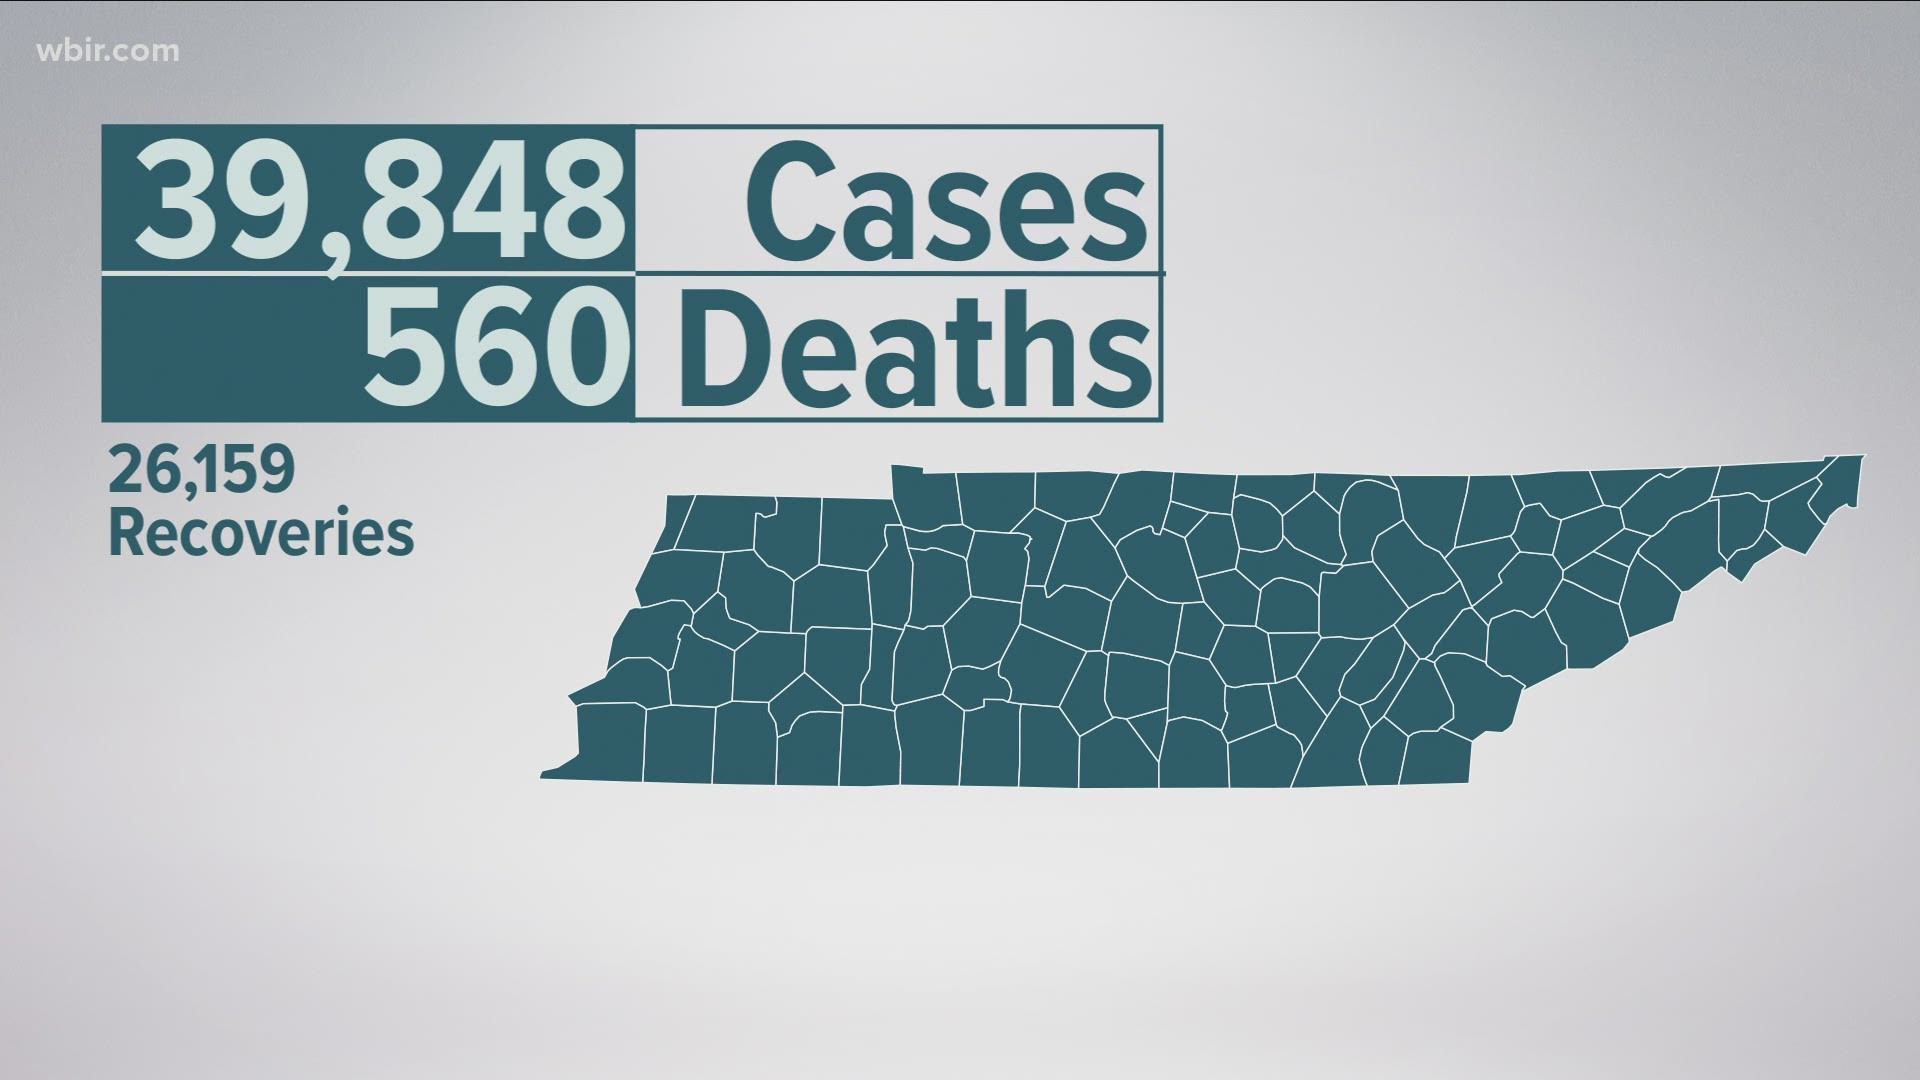 The state currently has more than 2,500 hospitalizations.